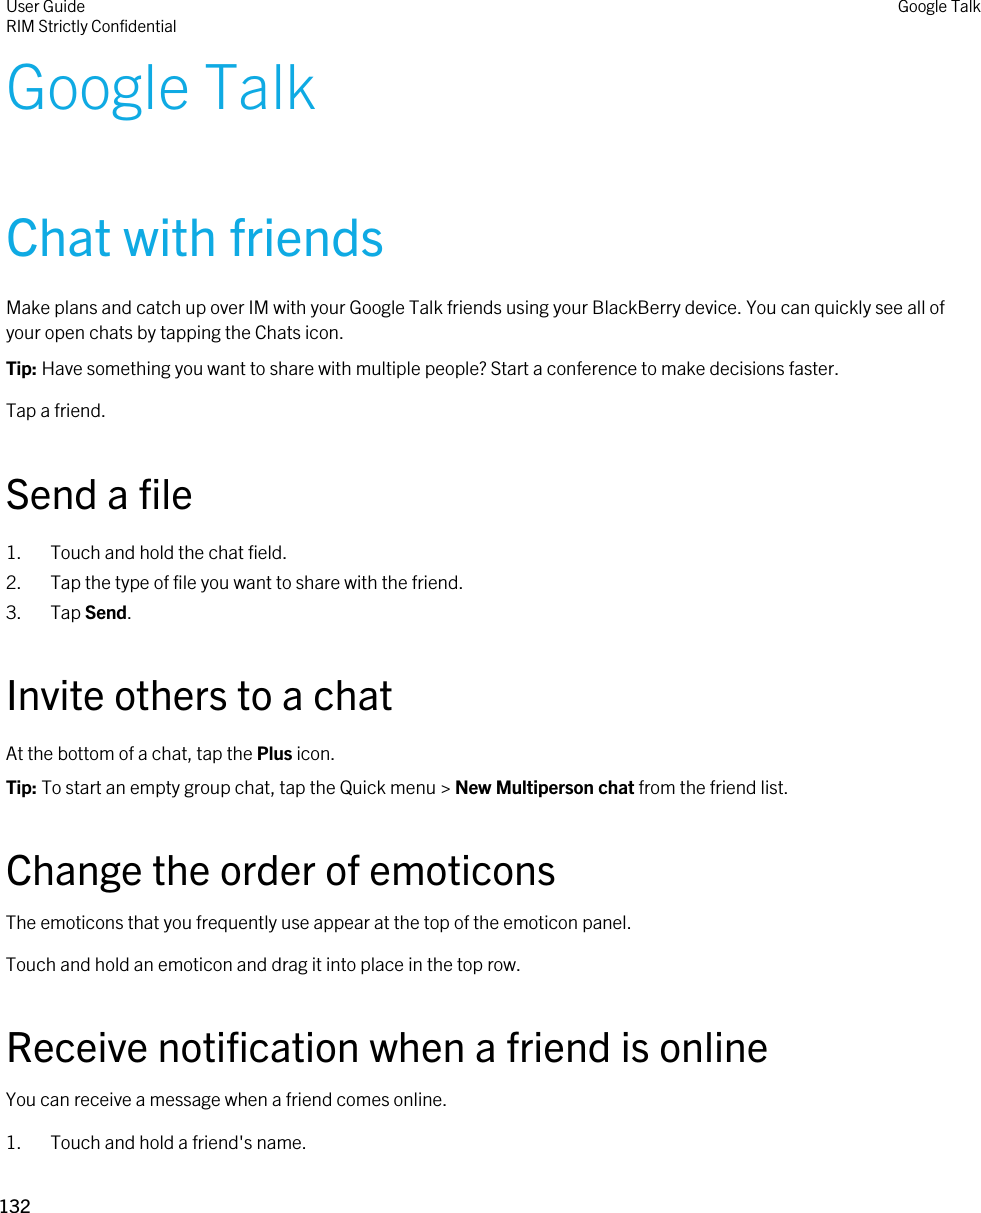 Google TalkChat with friendsMake plans and catch up over IM with your Google Talk friends using your BlackBerry device. You can quickly see all of your open chats by tapping the Chats icon.Tip: Have something you want to share with multiple people? Start a conference to make decisions faster.Tap a friend.Send a file1. Touch and hold the chat field.2. Tap the type of file you want to share with the friend.3. Tap Send.Invite others to a chatAt the bottom of a chat, tap the Plus icon.Tip: To start an empty group chat, tap the Quick menu &gt; New Multiperson chat from the friend list.Change the order of emoticonsThe emoticons that you frequently use appear at the top of the emoticon panel.Touch and hold an emoticon and drag it into place in the top row.Receive notification when a friend is onlineYou can receive a message when a friend comes online.1. Touch and hold a friend&apos;s name.User GuideRIM Strictly ConfidentialGoogle Talk132 